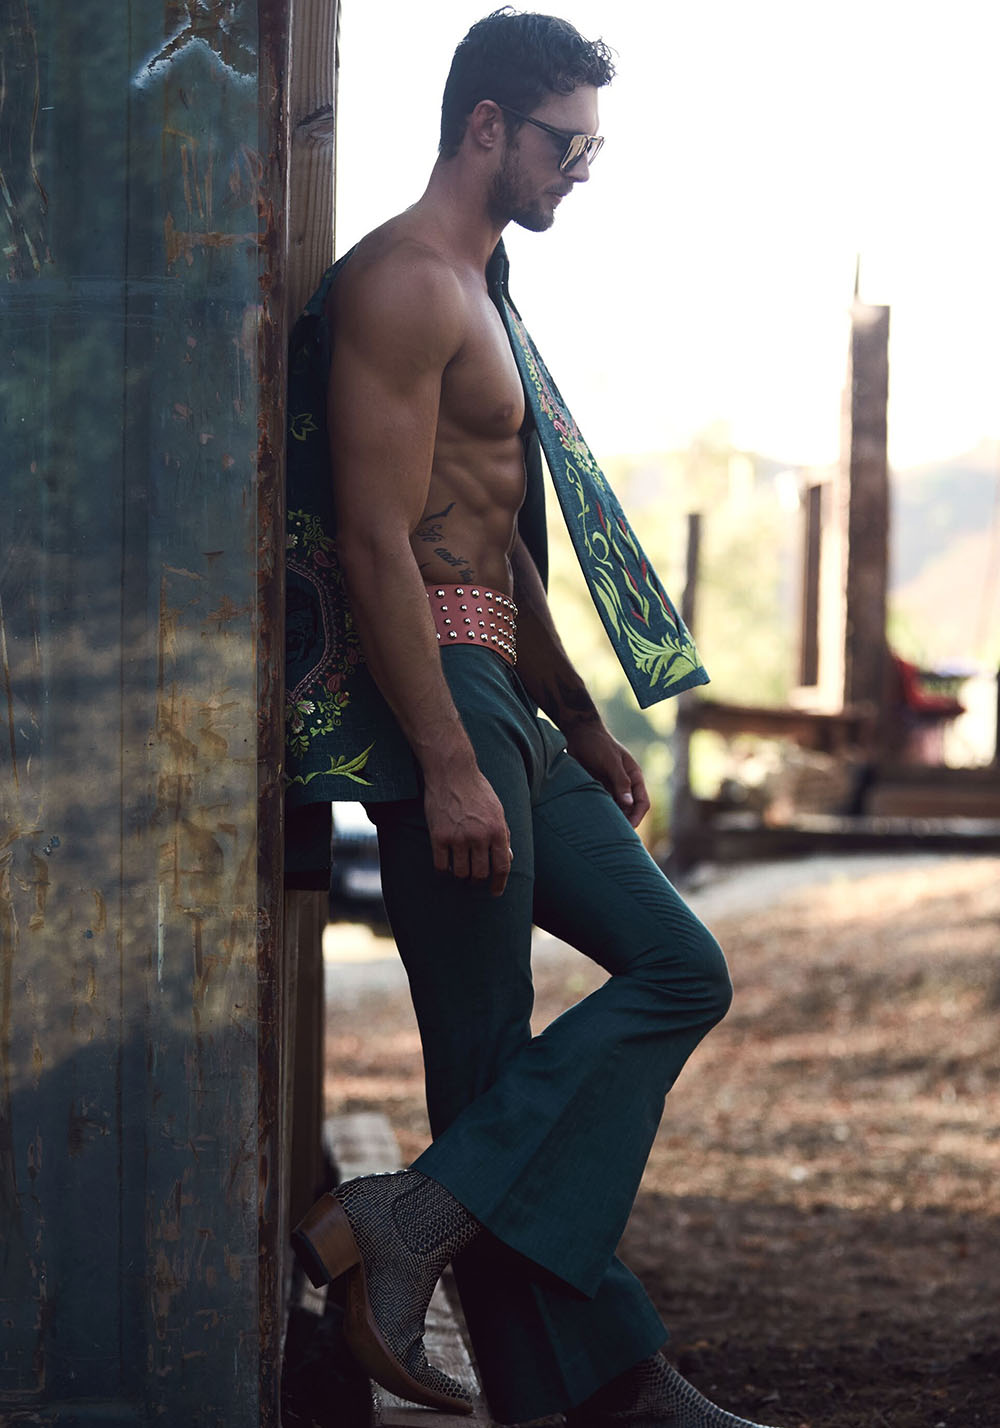 Christian Hogue covers Man of Metropolis October 2020 by Santiago Bisso